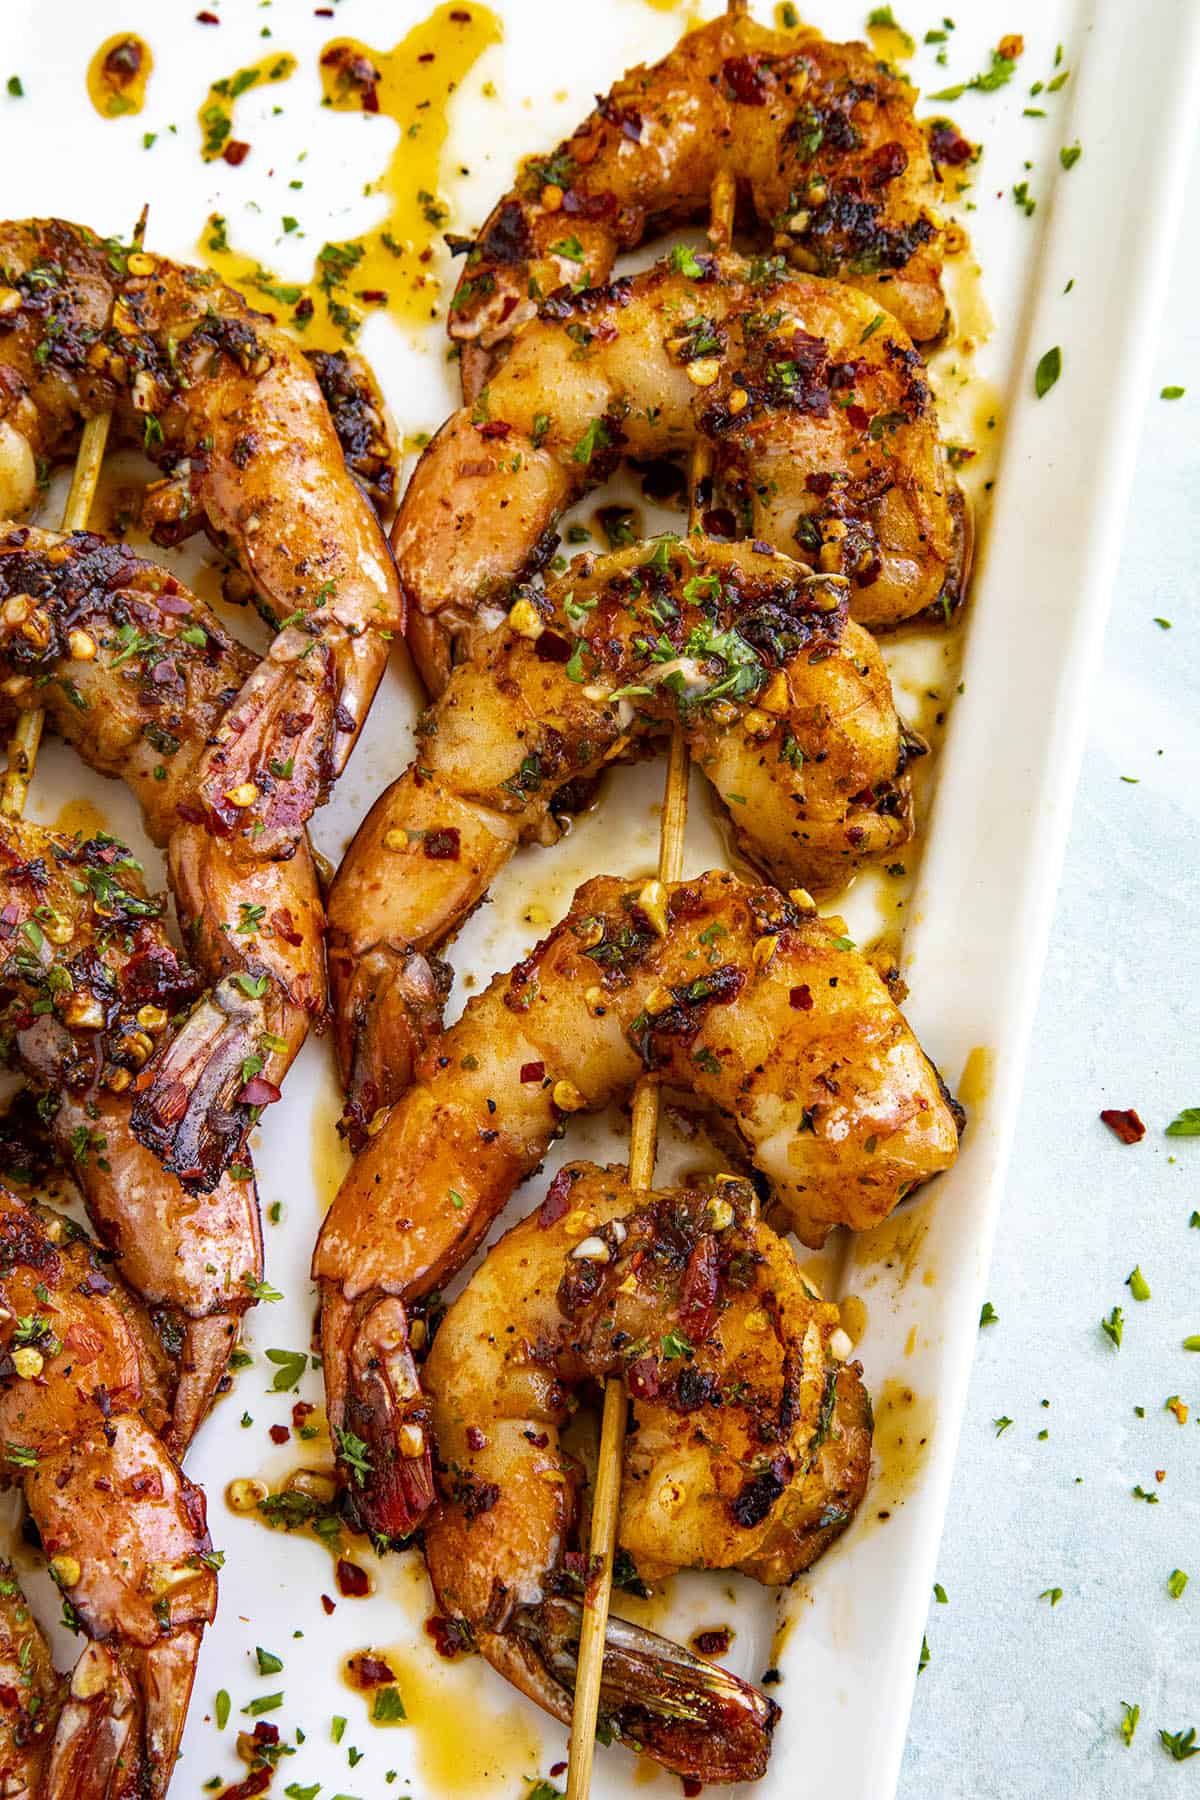 Grilled shrimp with loads of marinade